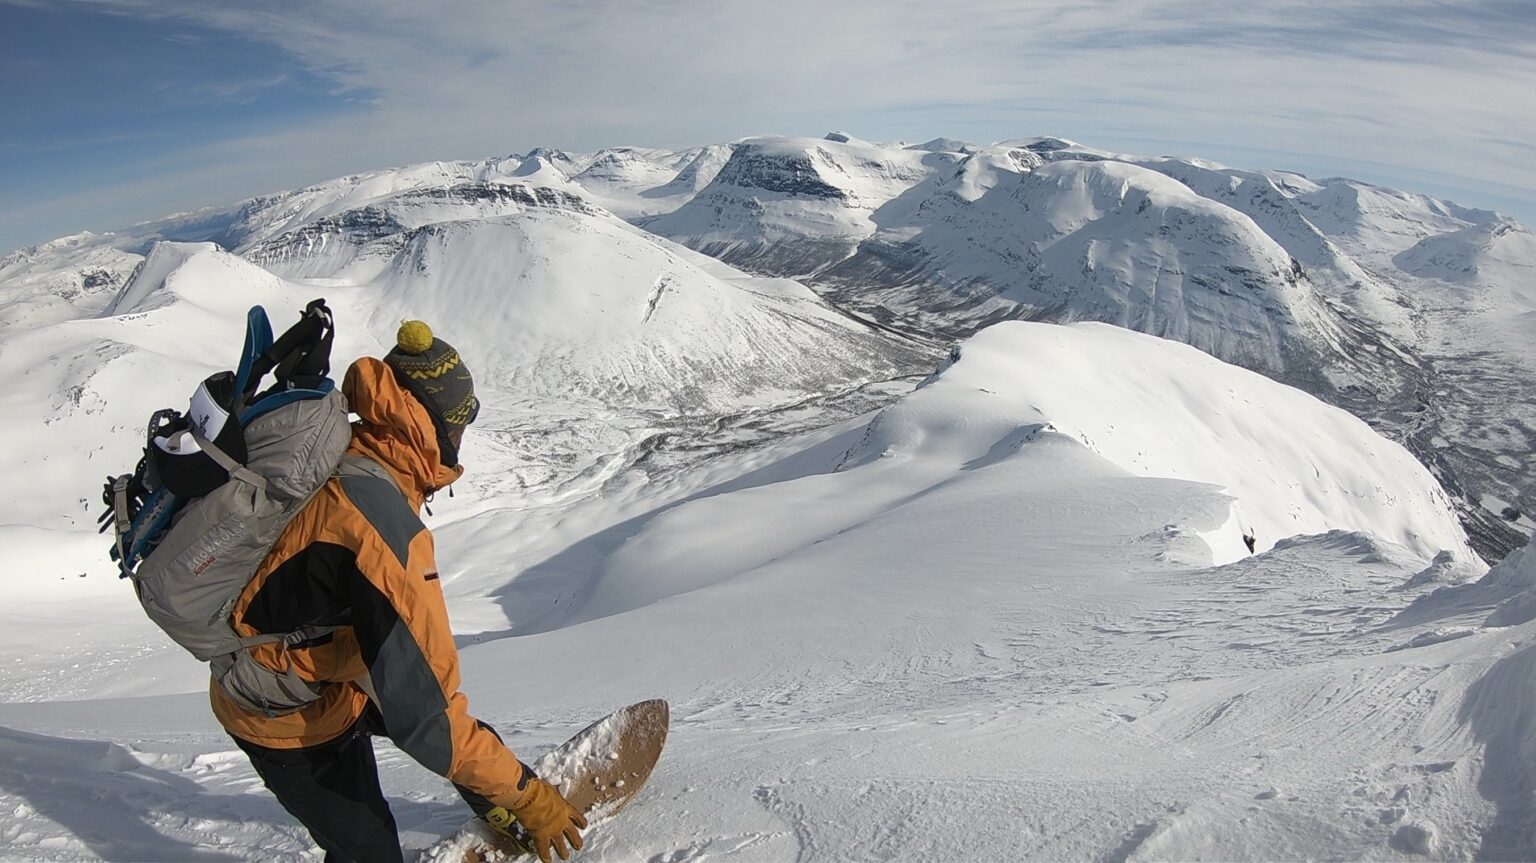 Getting ready to snowboard into the Blåbærfjellet Northeast bowl